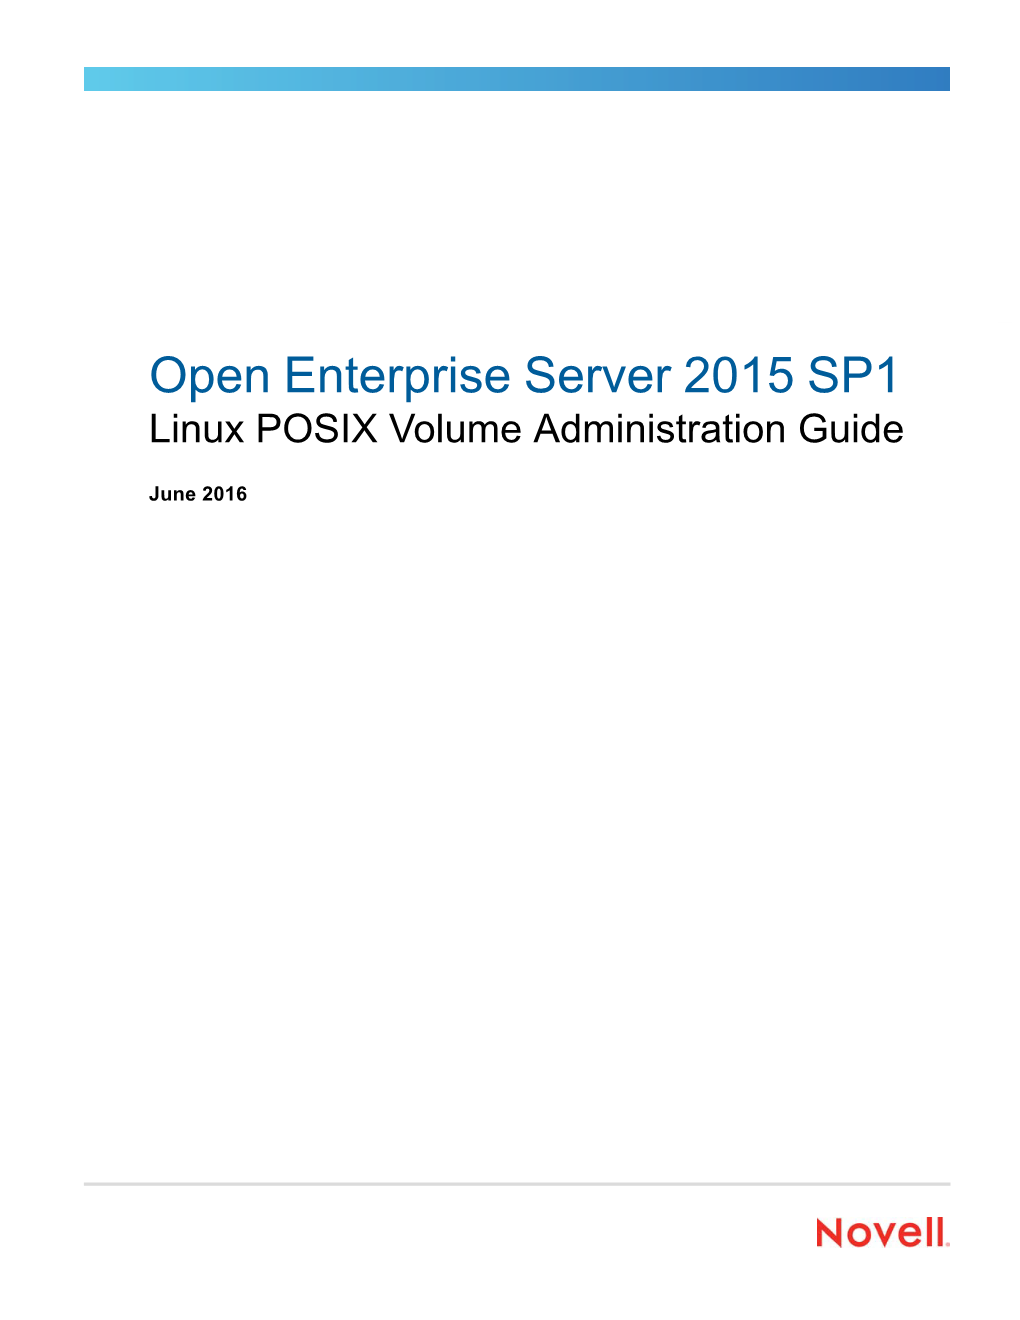 OES 2015: Linux POSIX Volume Administration Guide